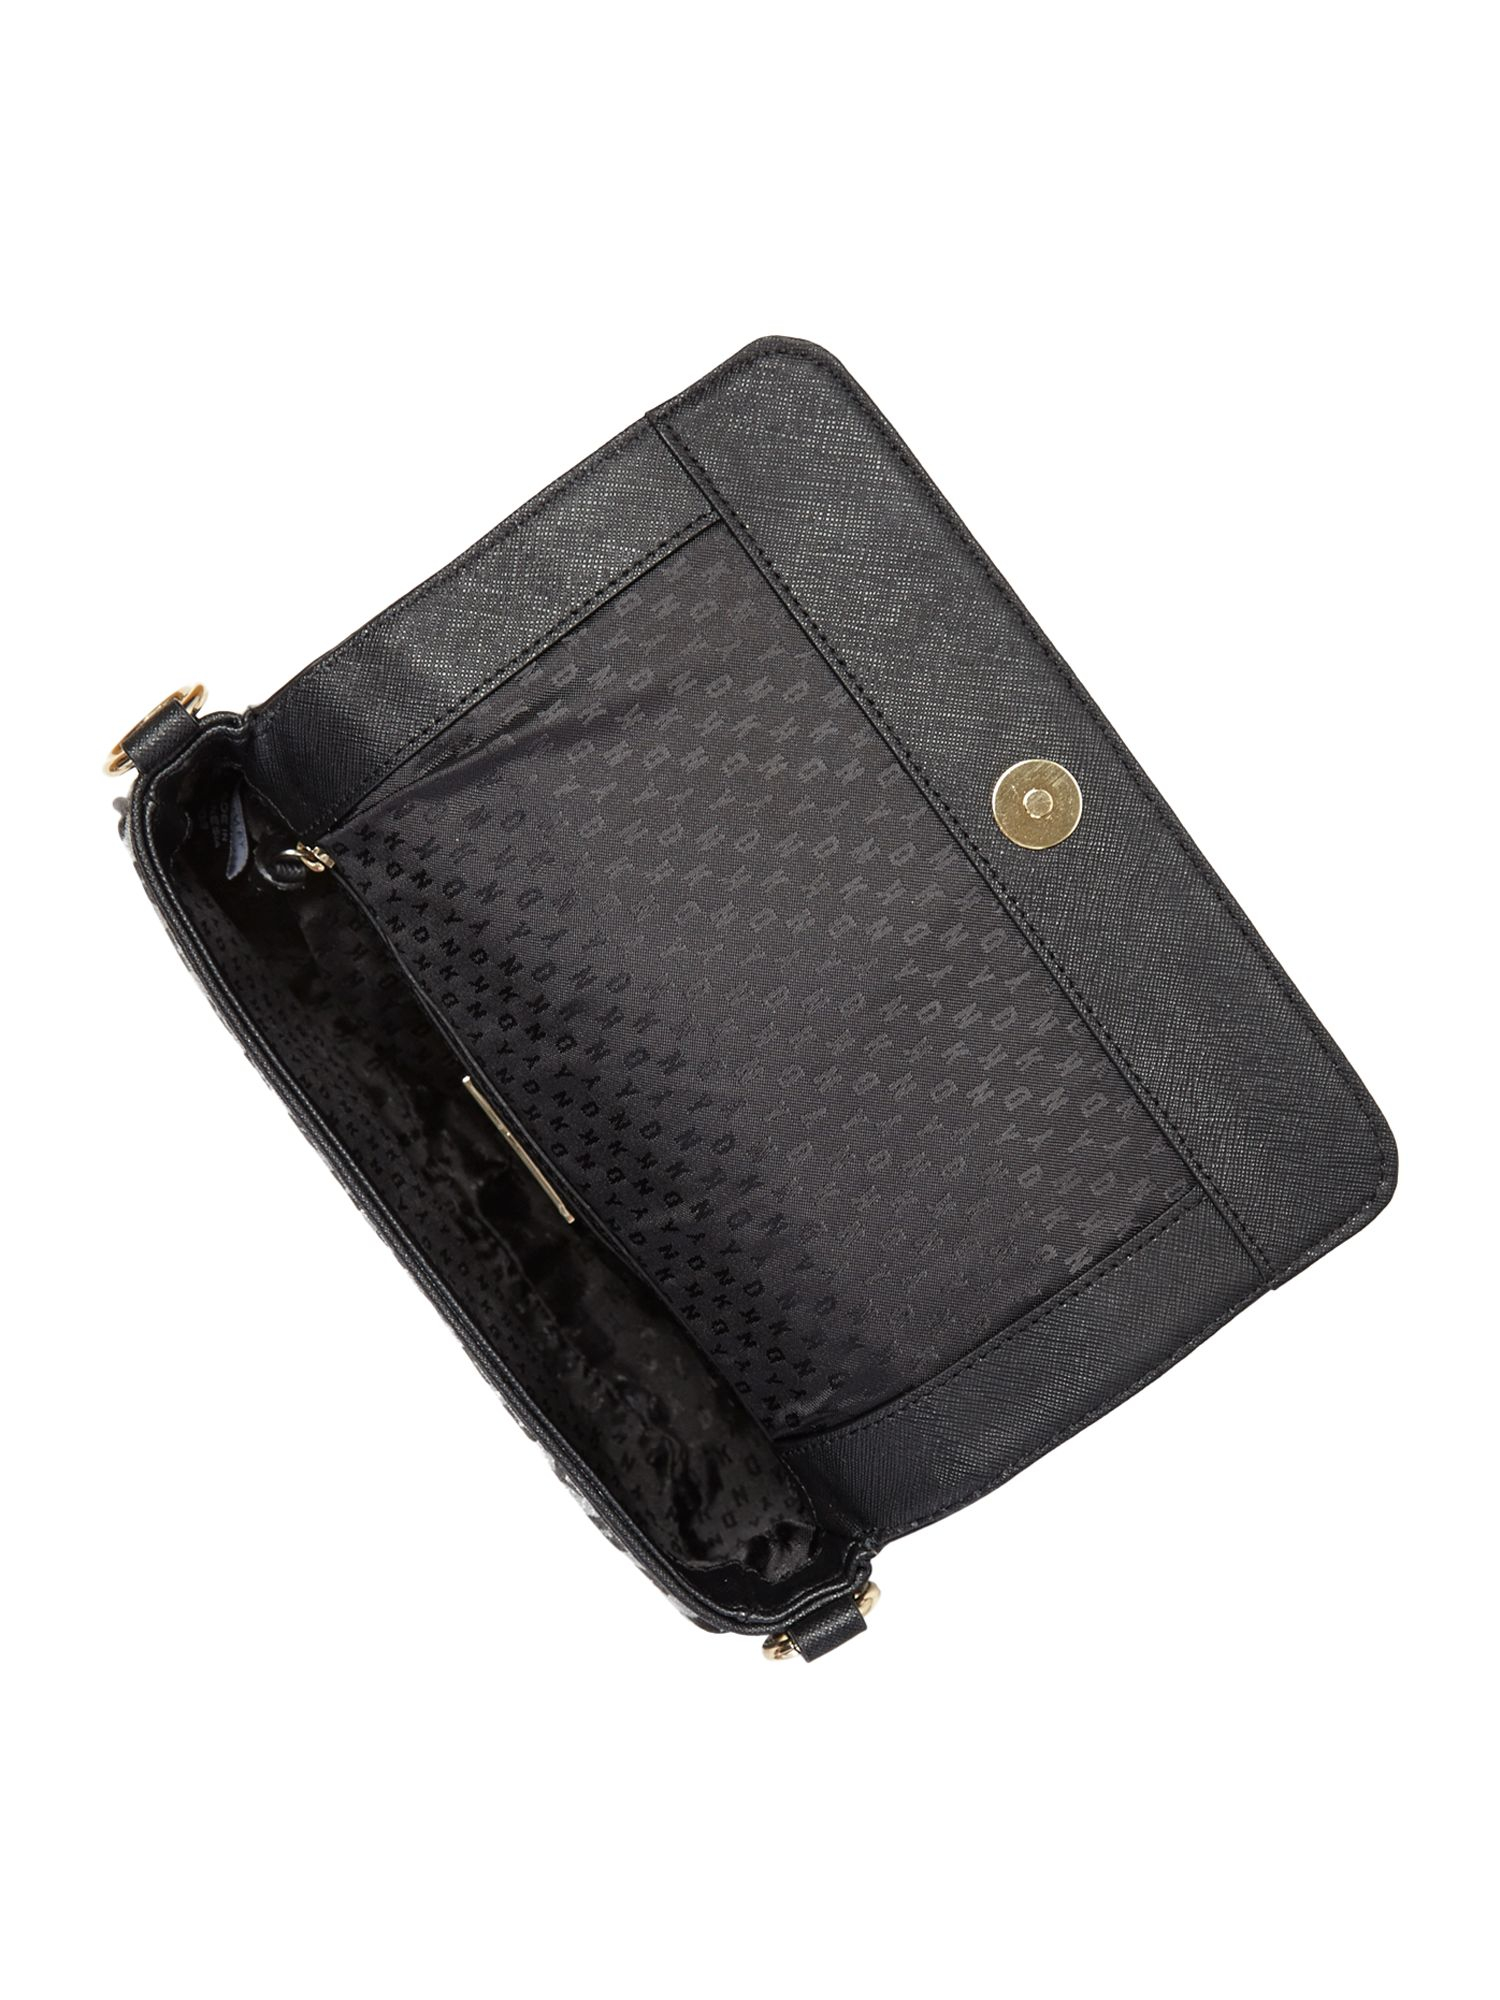 Dkny Black Small Flap Over Chain Cross Body Bag in Gray (Black) | Lyst